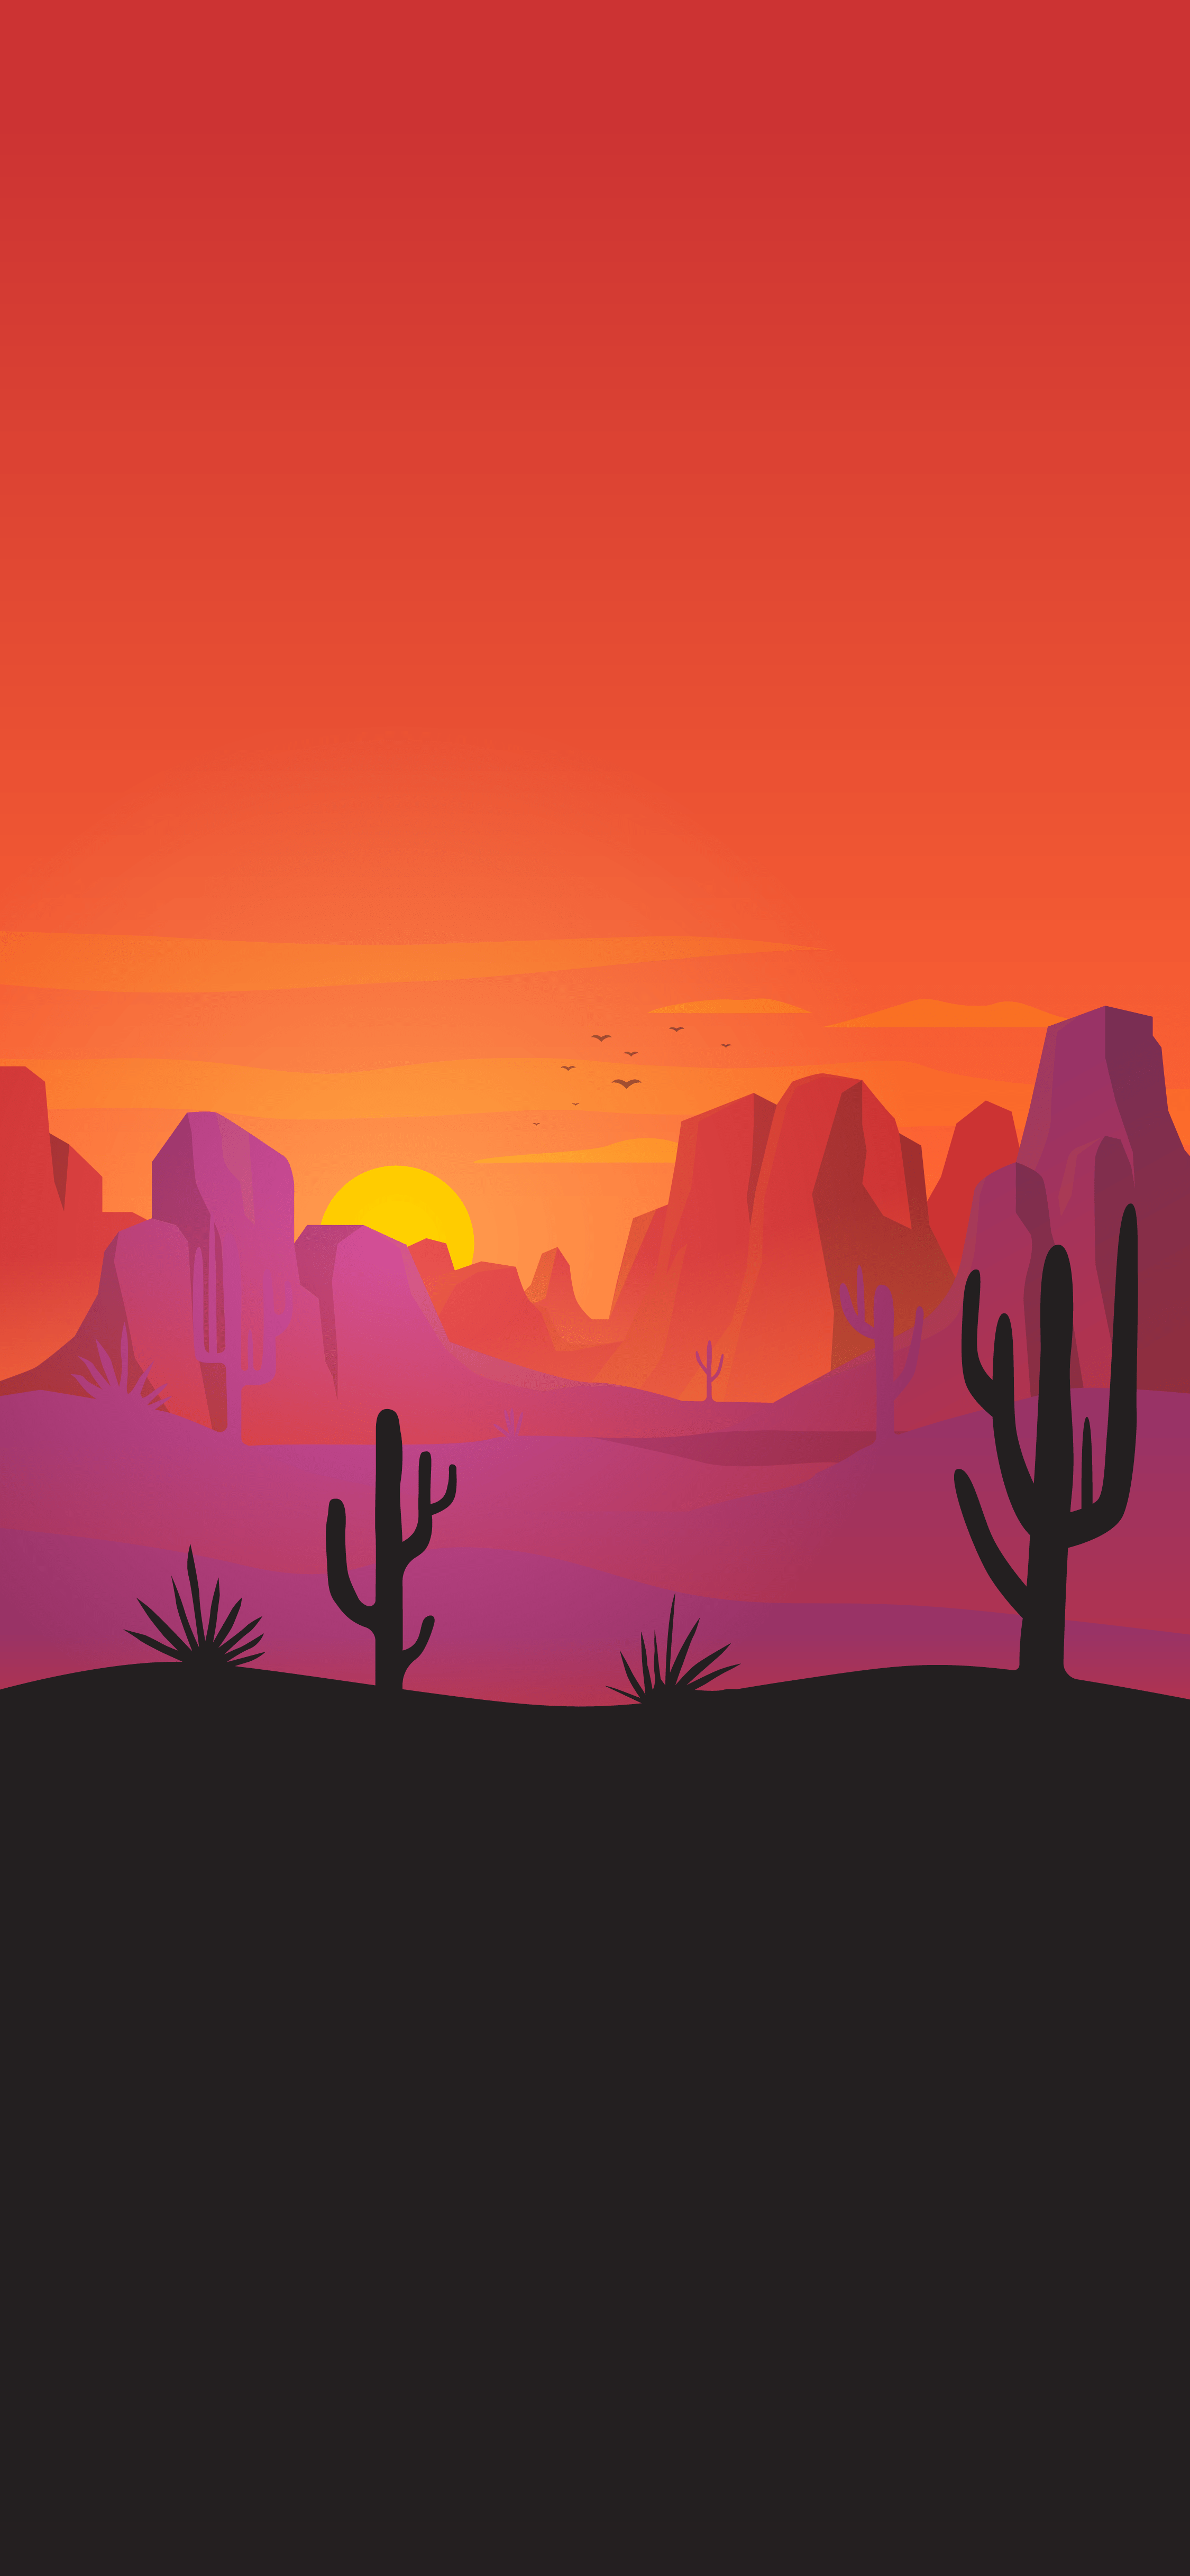 A desert landscape with cacti and mountains in the background - Desert